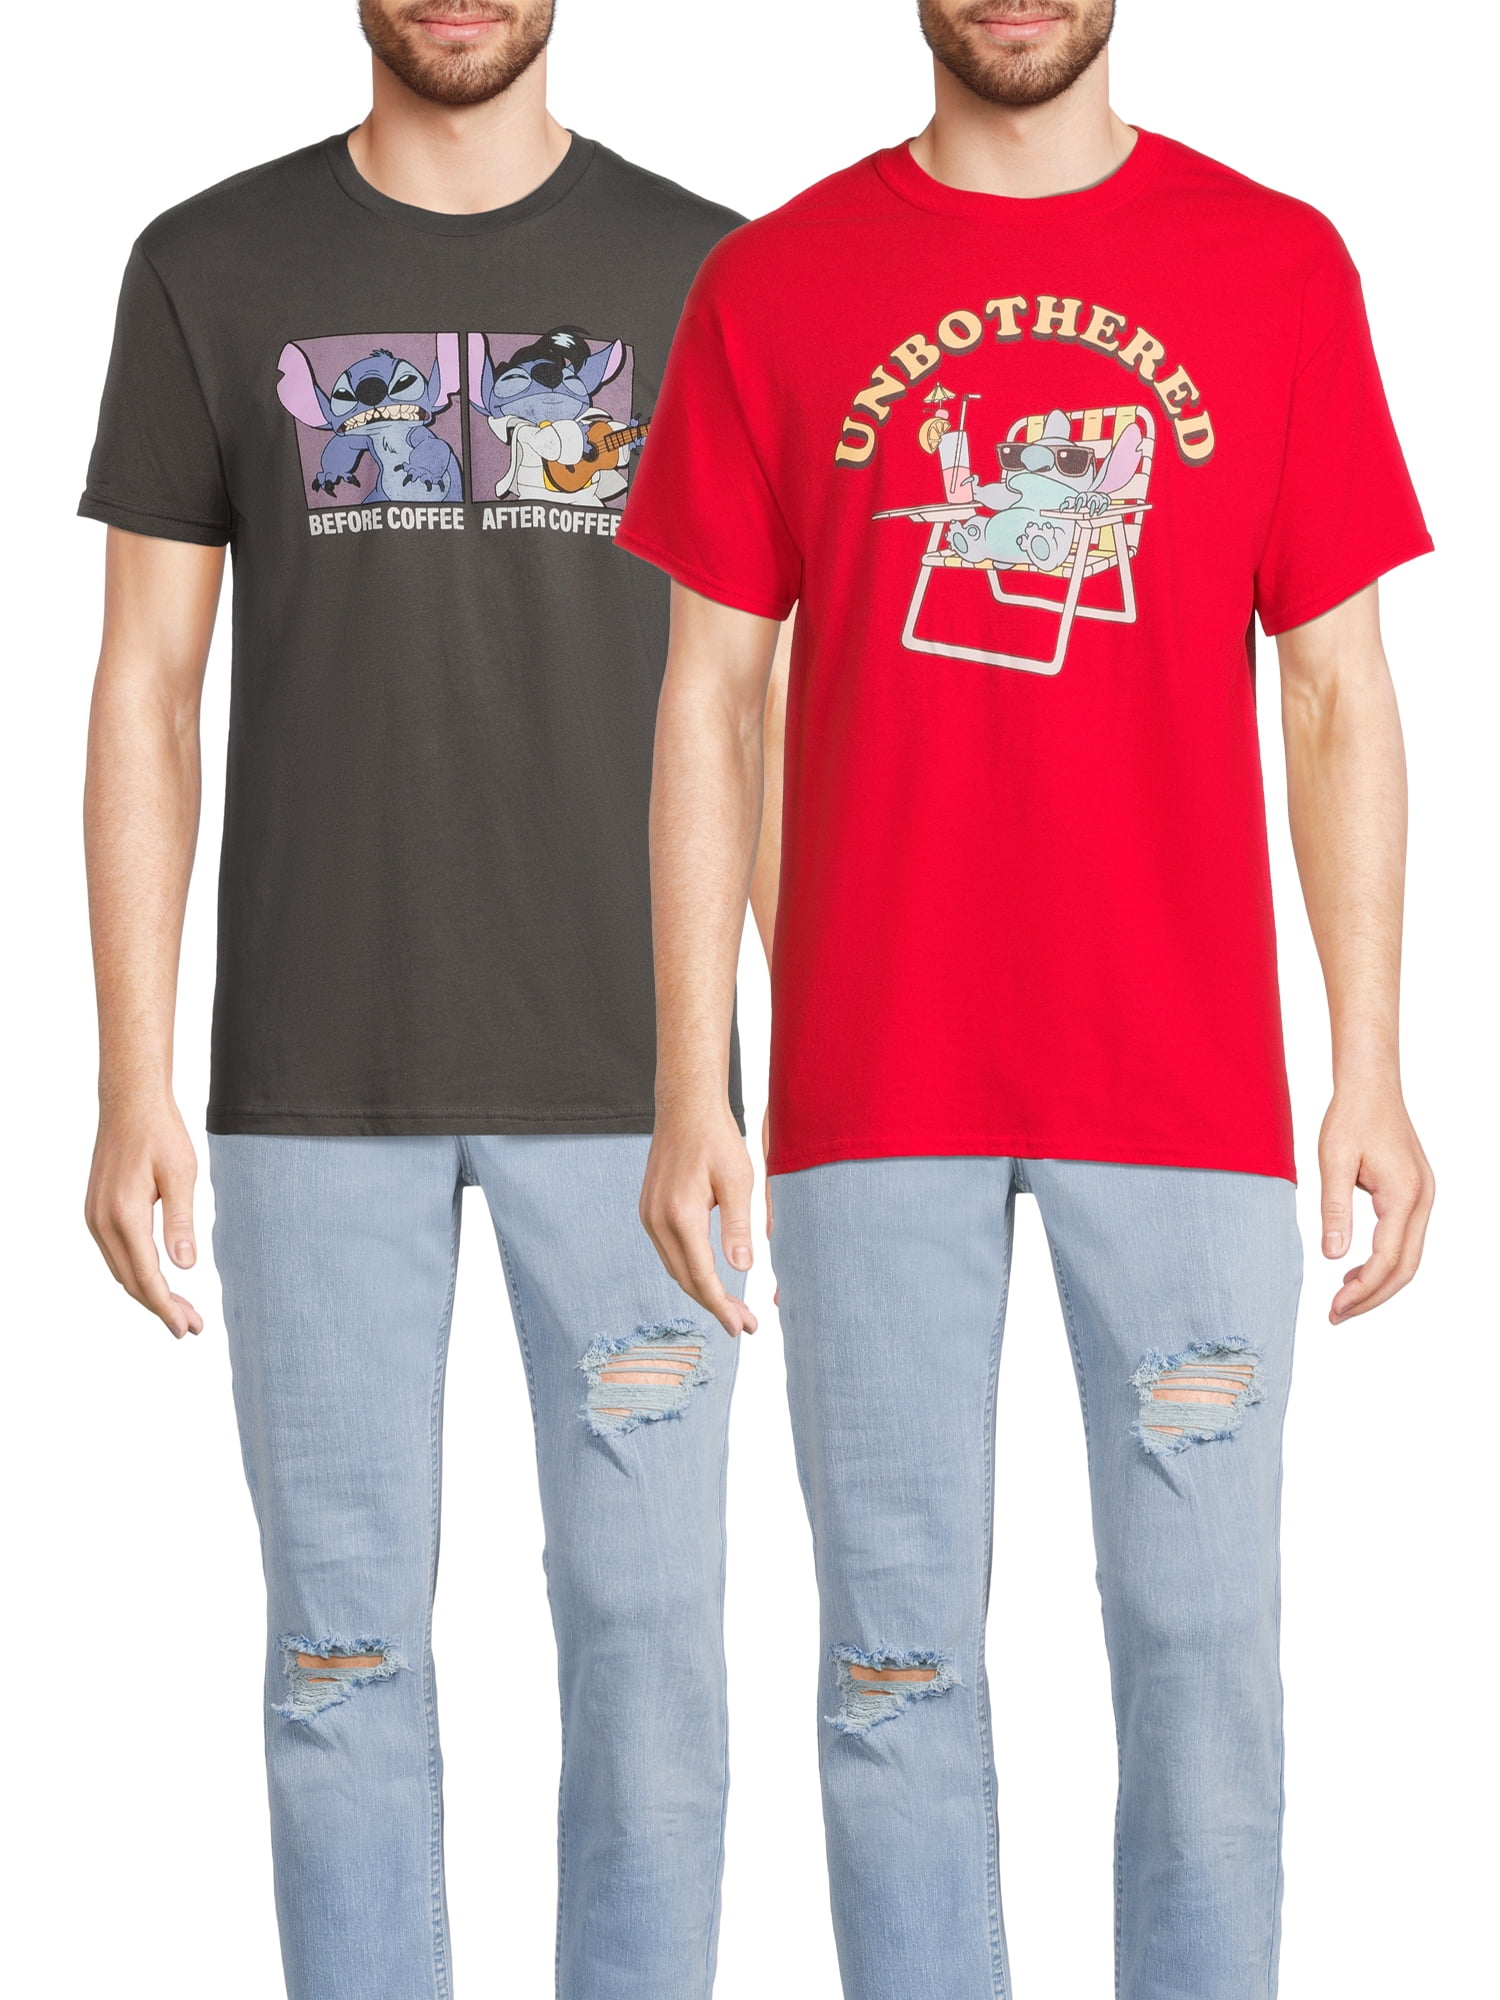 Lilo and Stitch Men's & Big Men's Stitch Unbothered and Coffee Graphic  Tees, 2-Pack, Sizes S-3XL